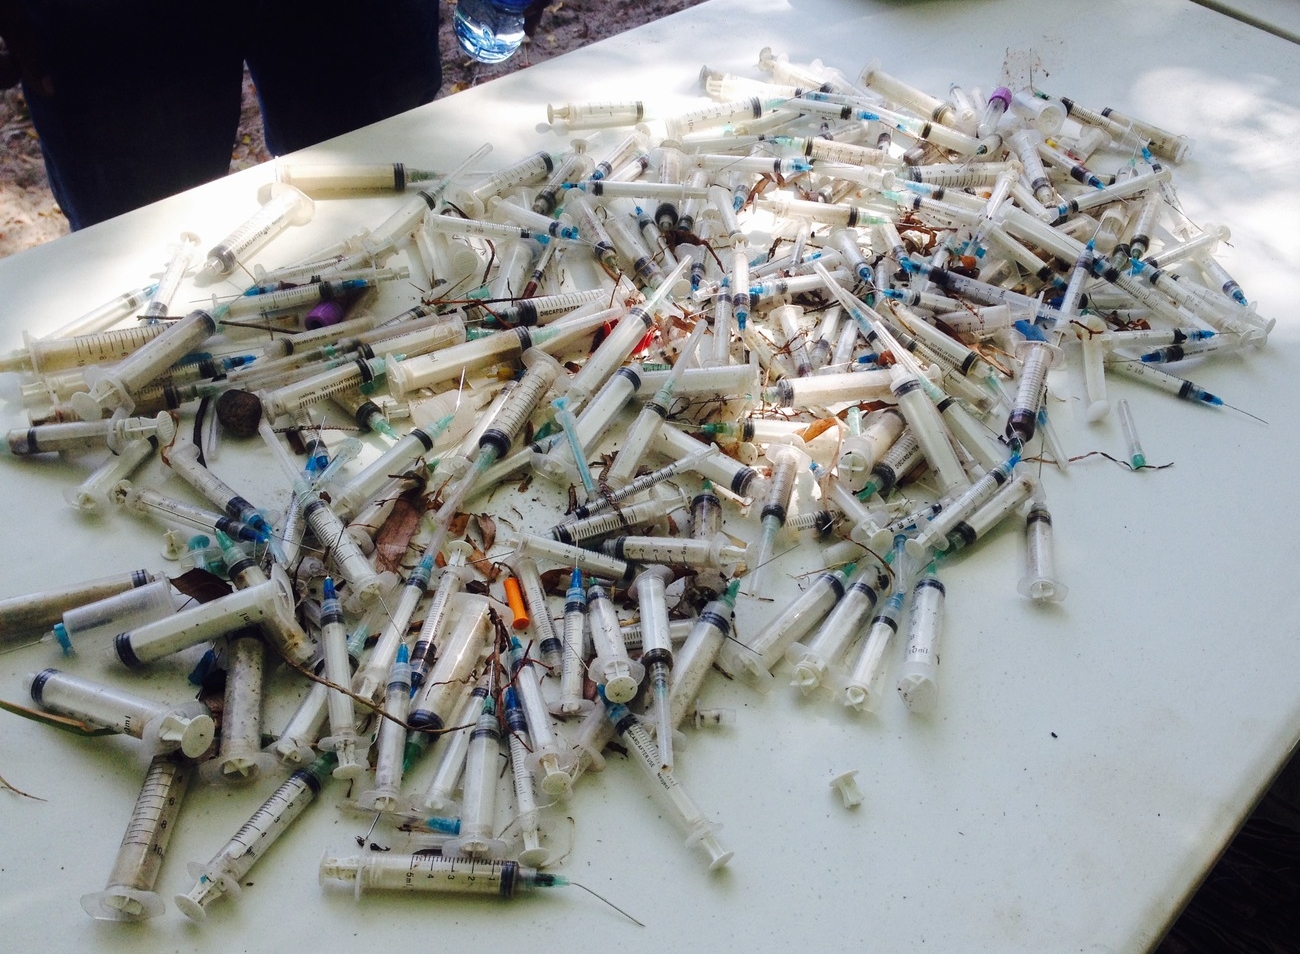 Used Syringes found during a beach clean up